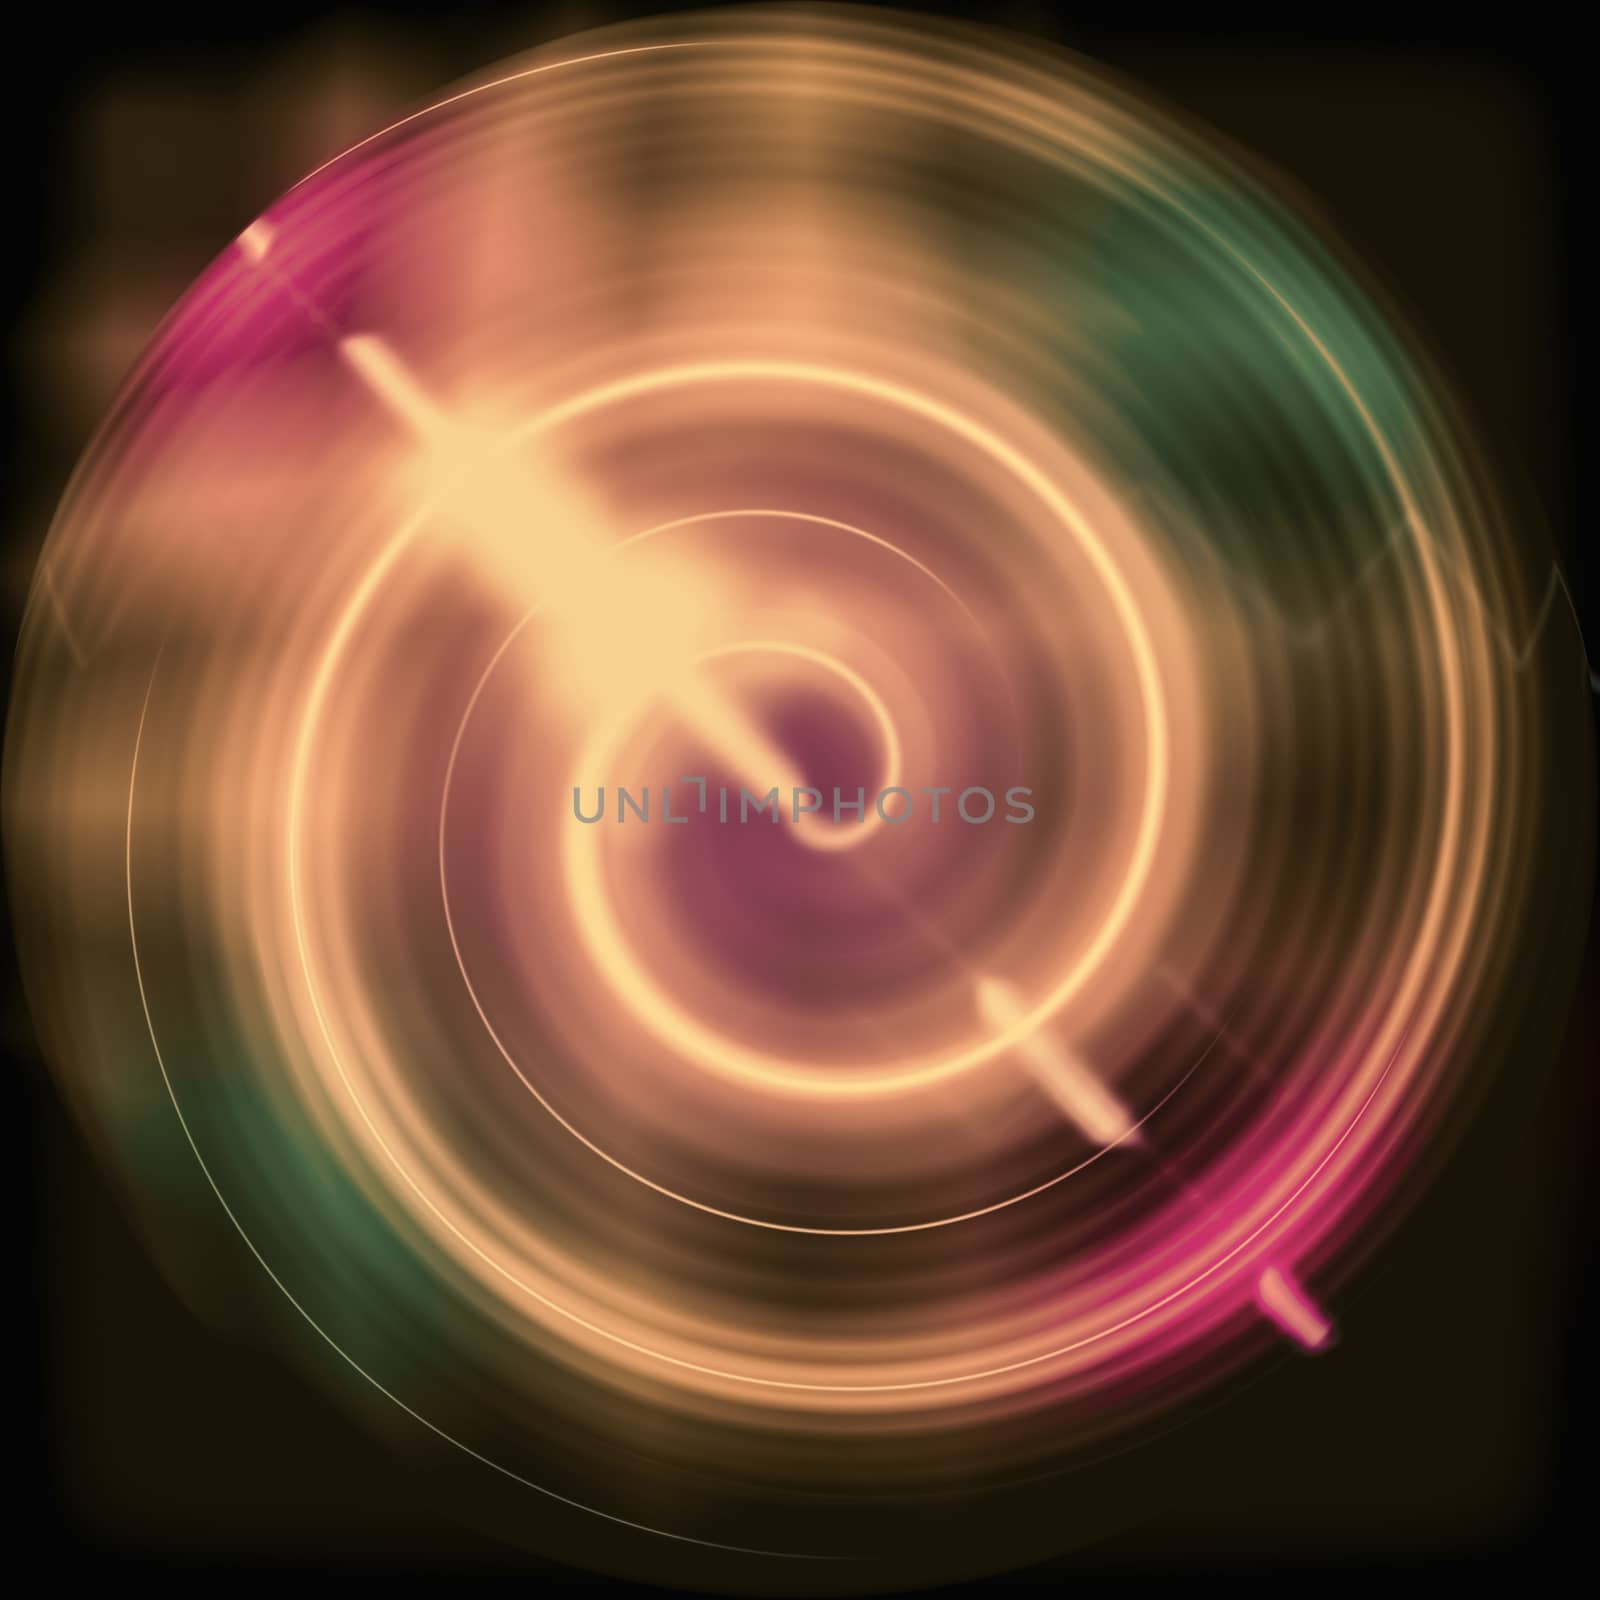 Abstract image in the form of a luminous spiral by georgina198